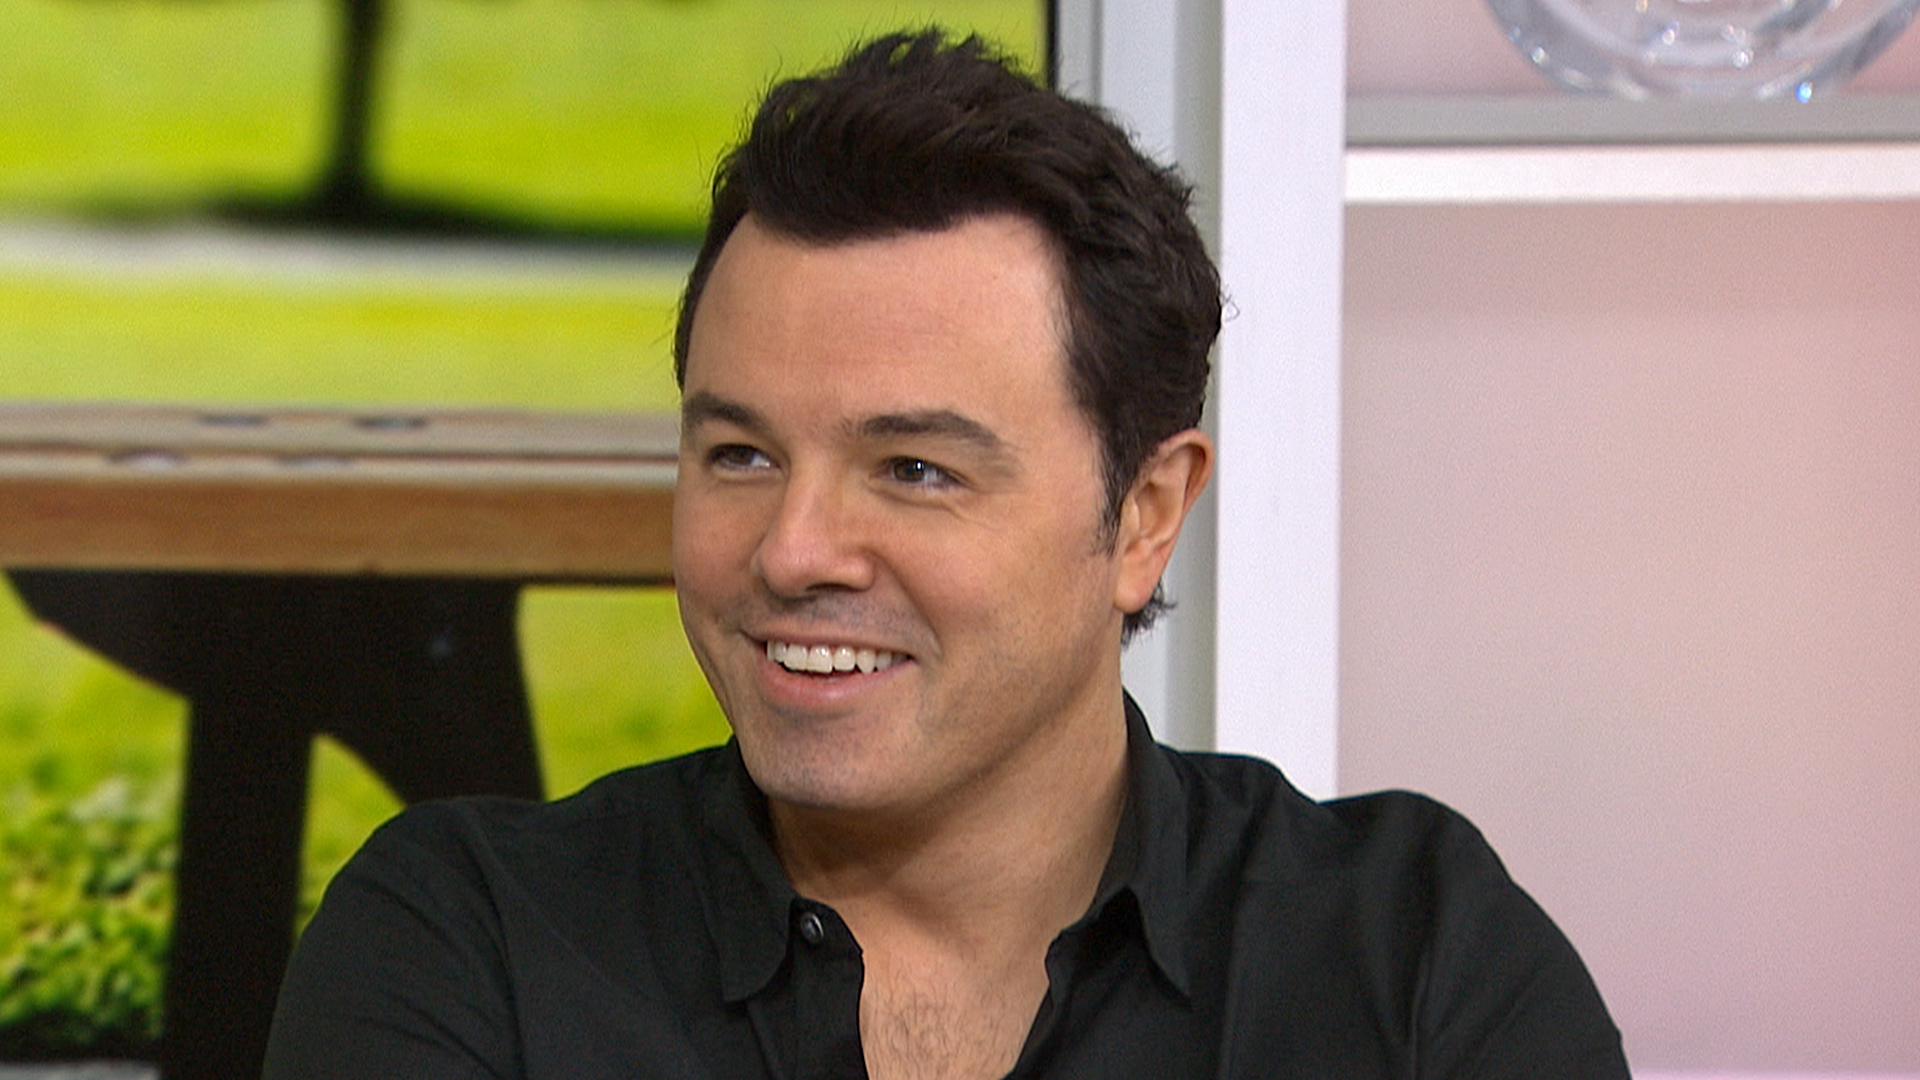 TV and film comedy creator Seth MacFarlane has a “Ted” talk with TODAY’s Wi...